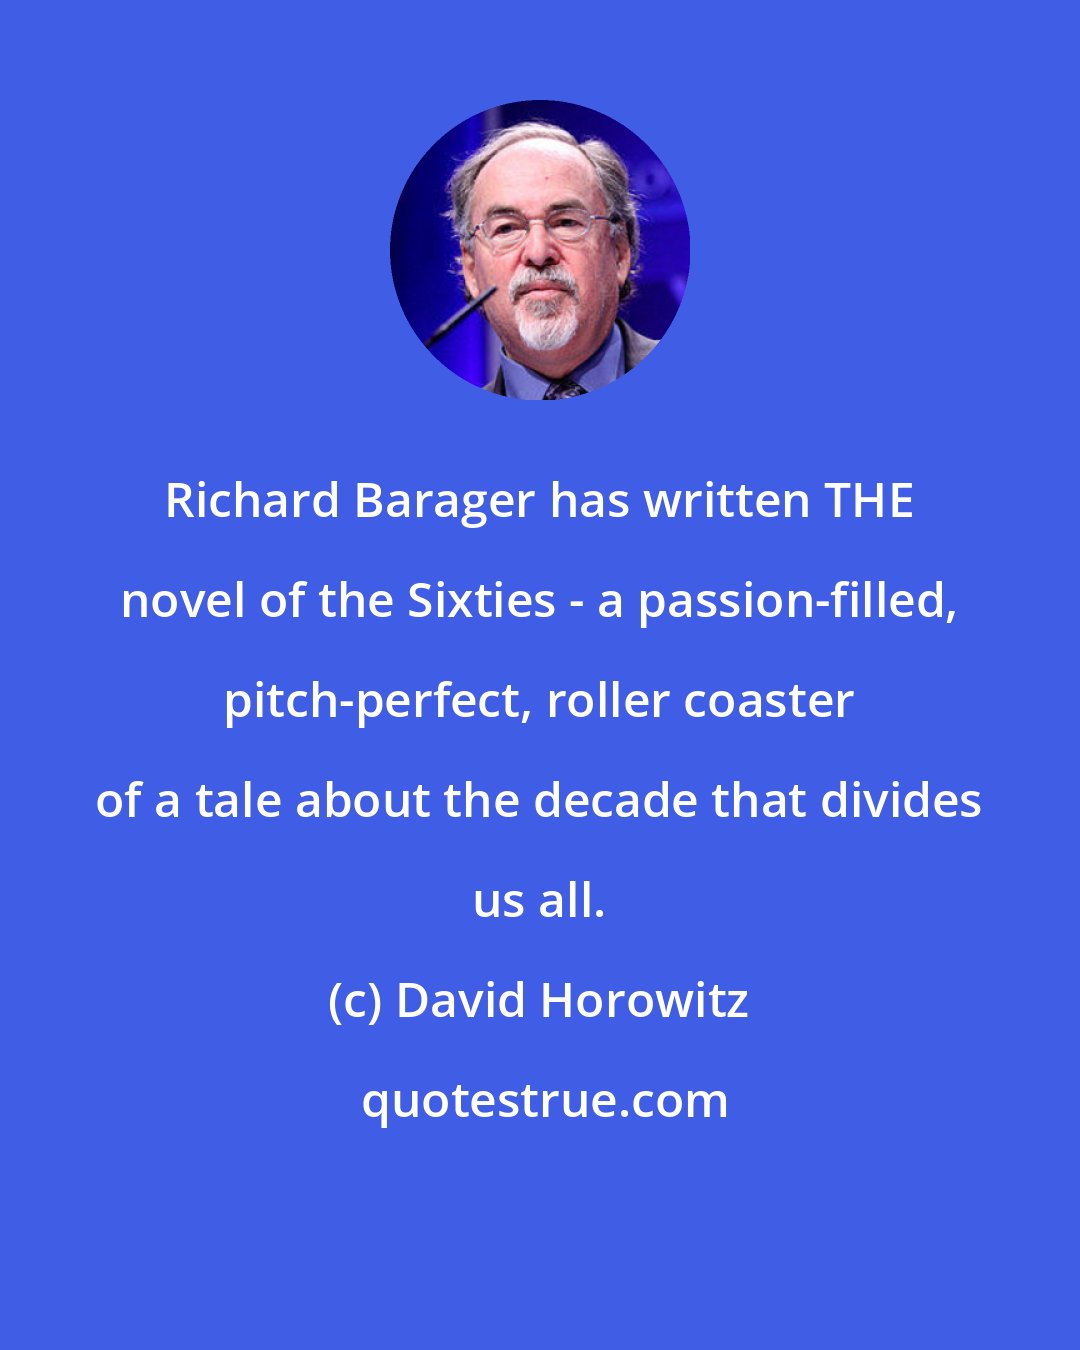 David Horowitz: Richard Barager has written THE novel of the Sixties - a passion-filled, pitch-perfect, roller coaster of a tale about the decade that divides us all.